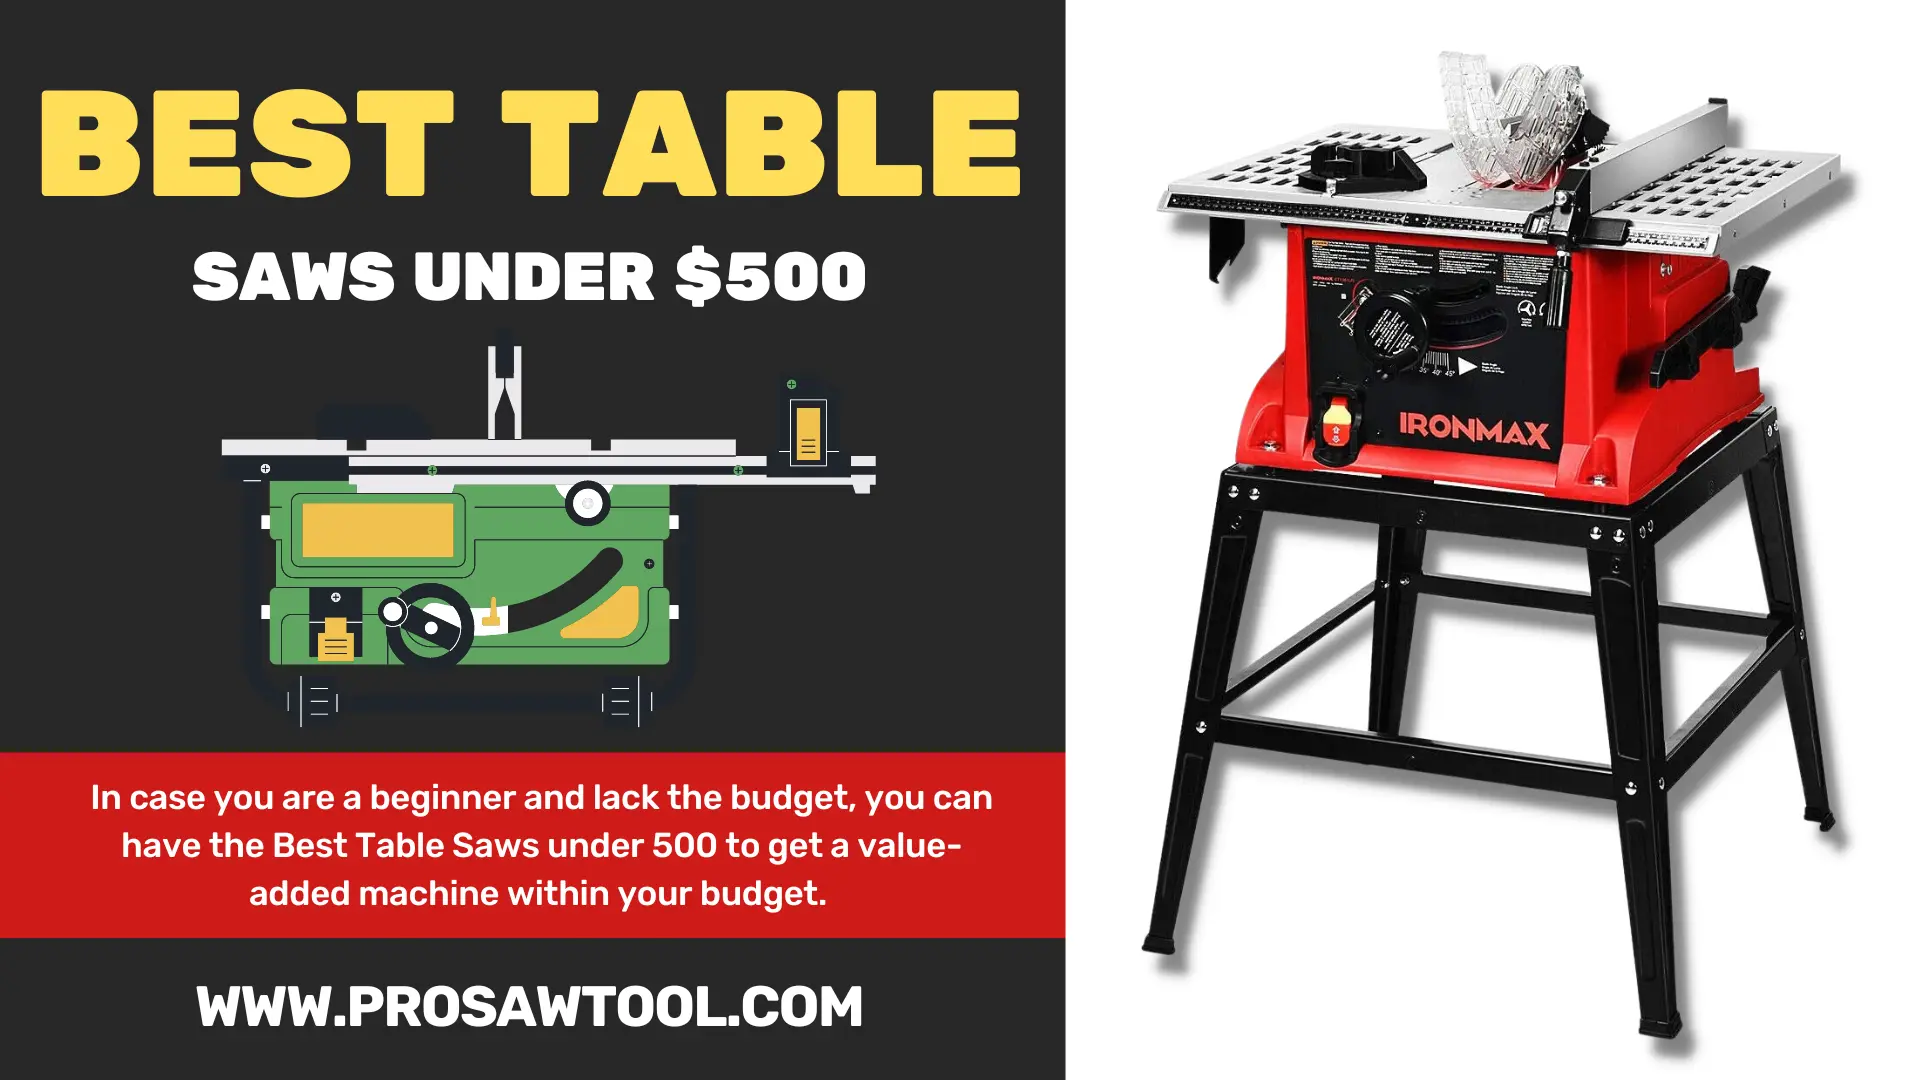 Best Table Saws under 500